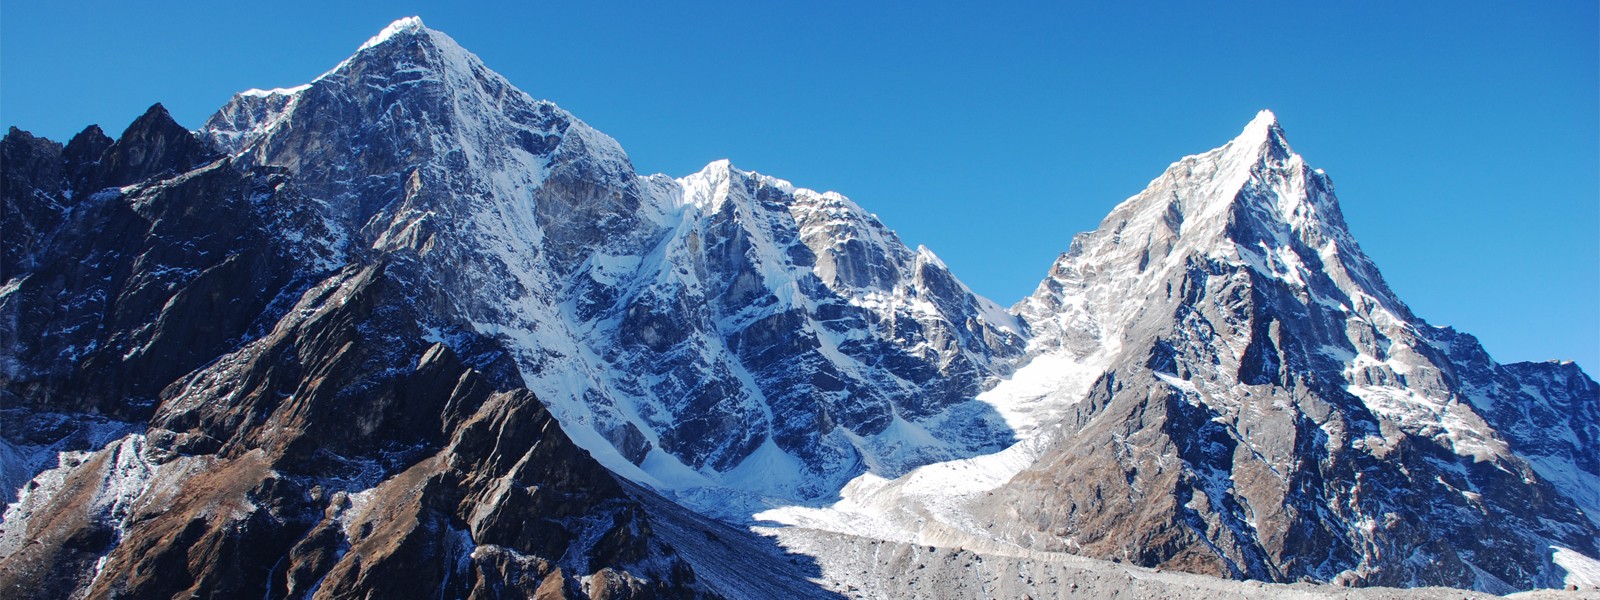 Taboche and Ama Dablam Expedition